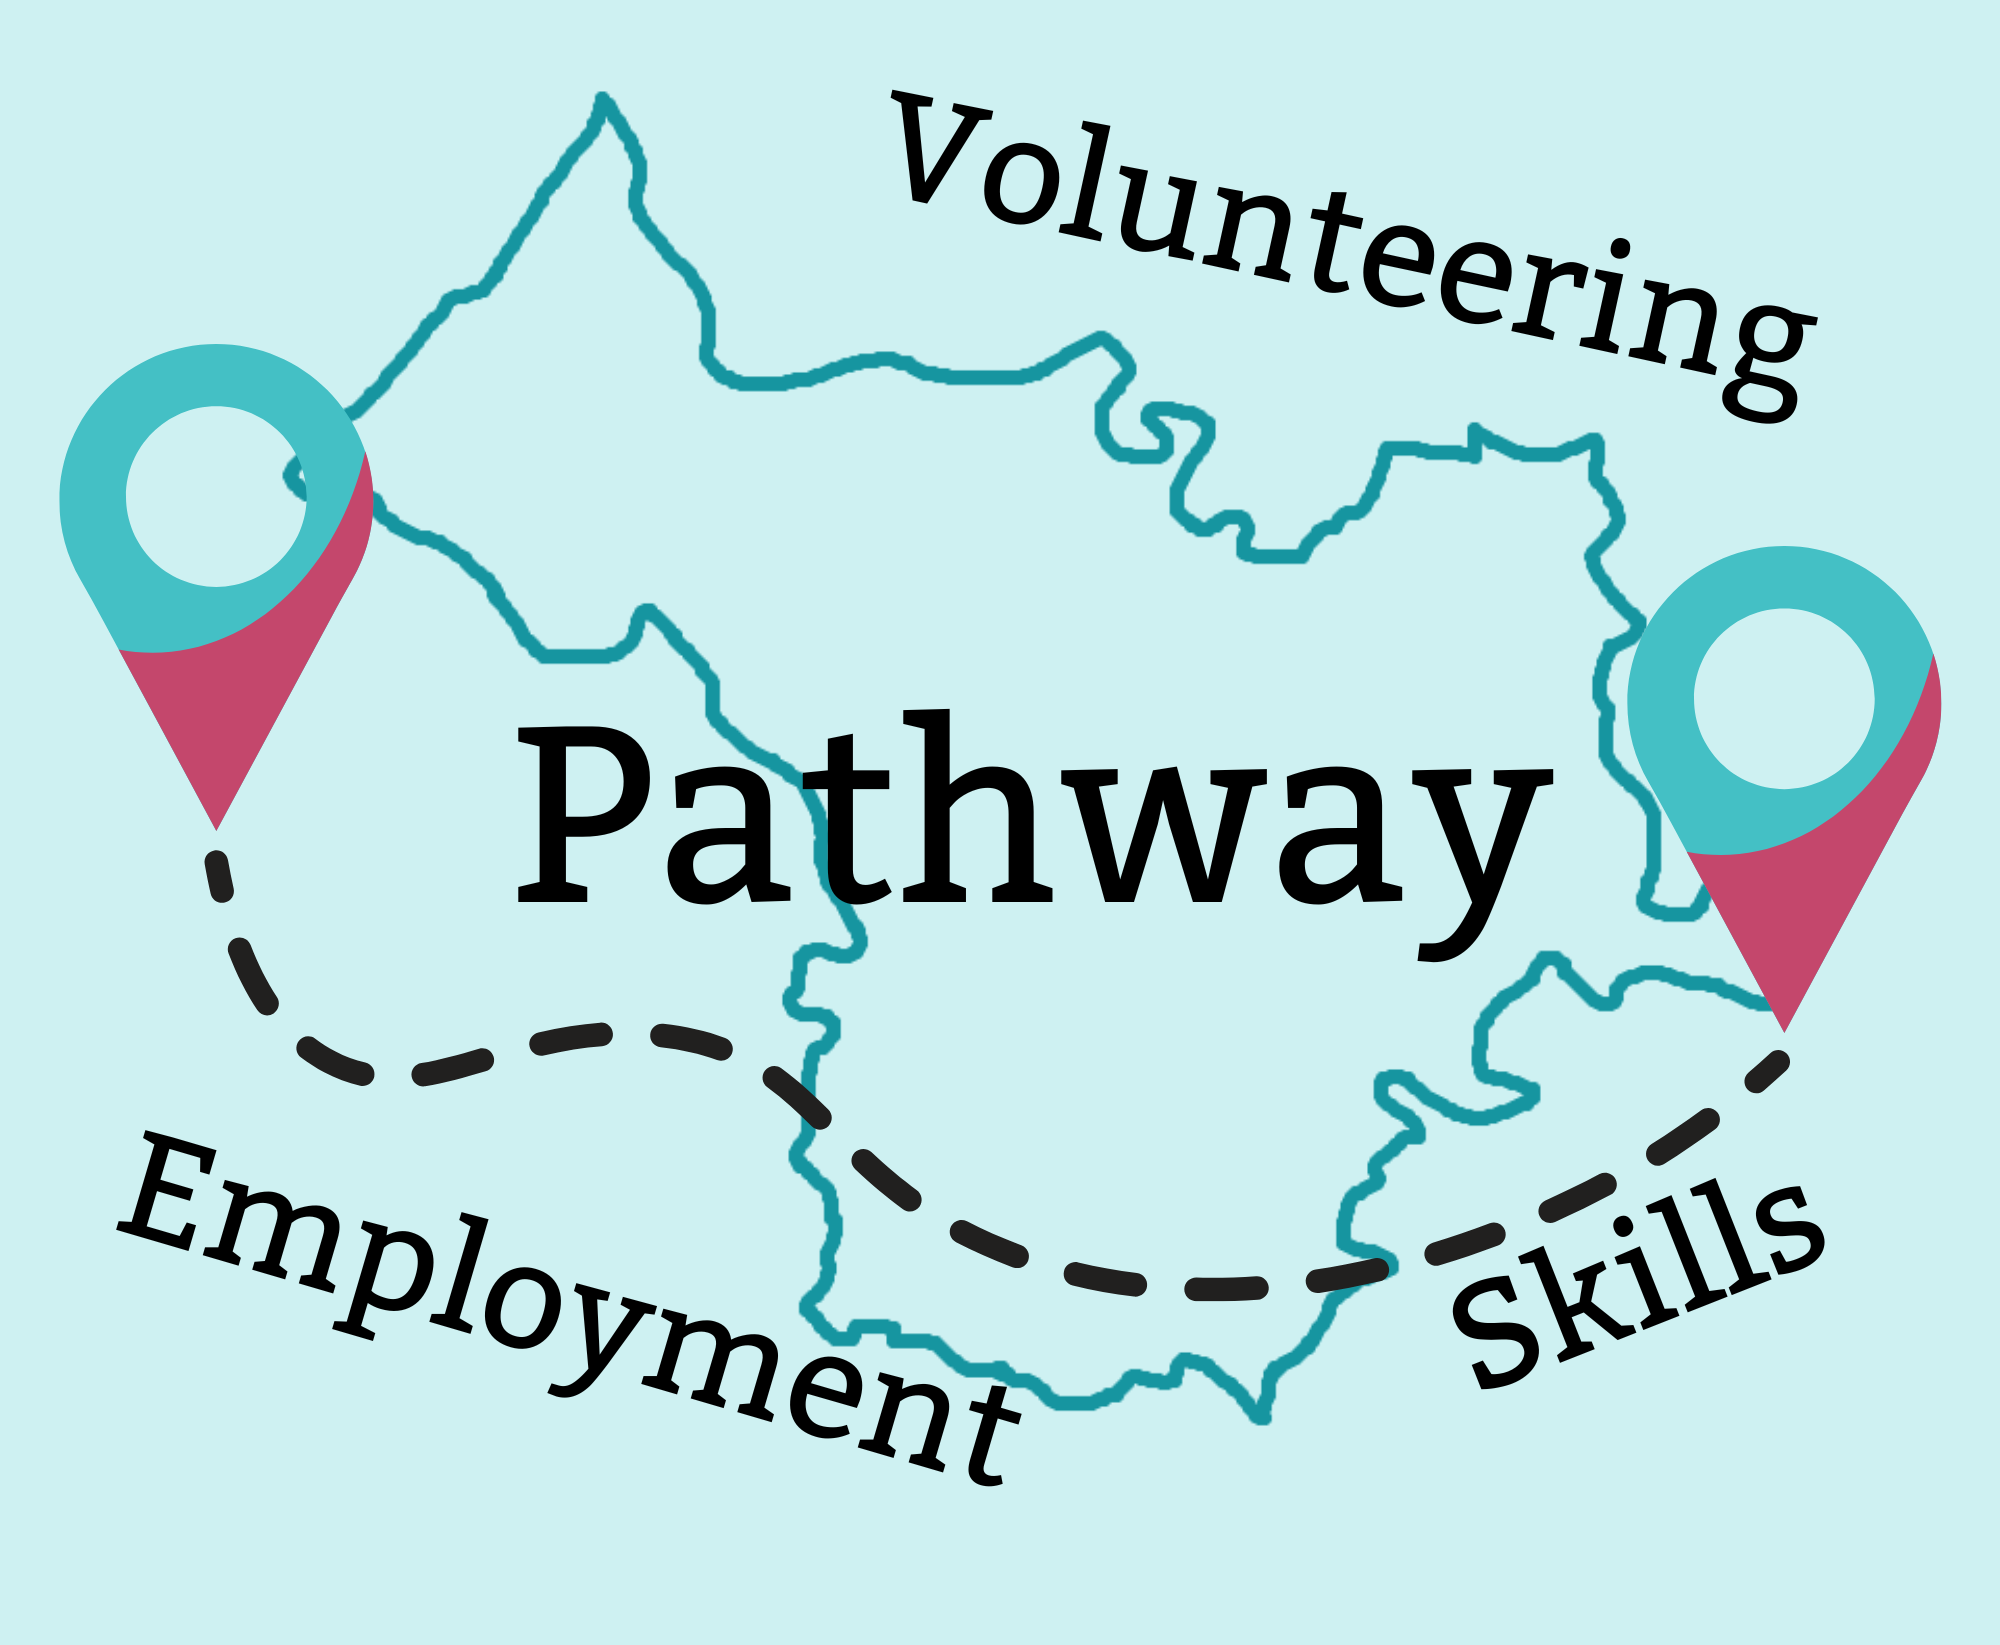 Digital illustration: Outline of Bristol with two navigation pin icons atop it. The words 'Pathway' 'Employment' 'Skills' and 'Volunteering' appear.